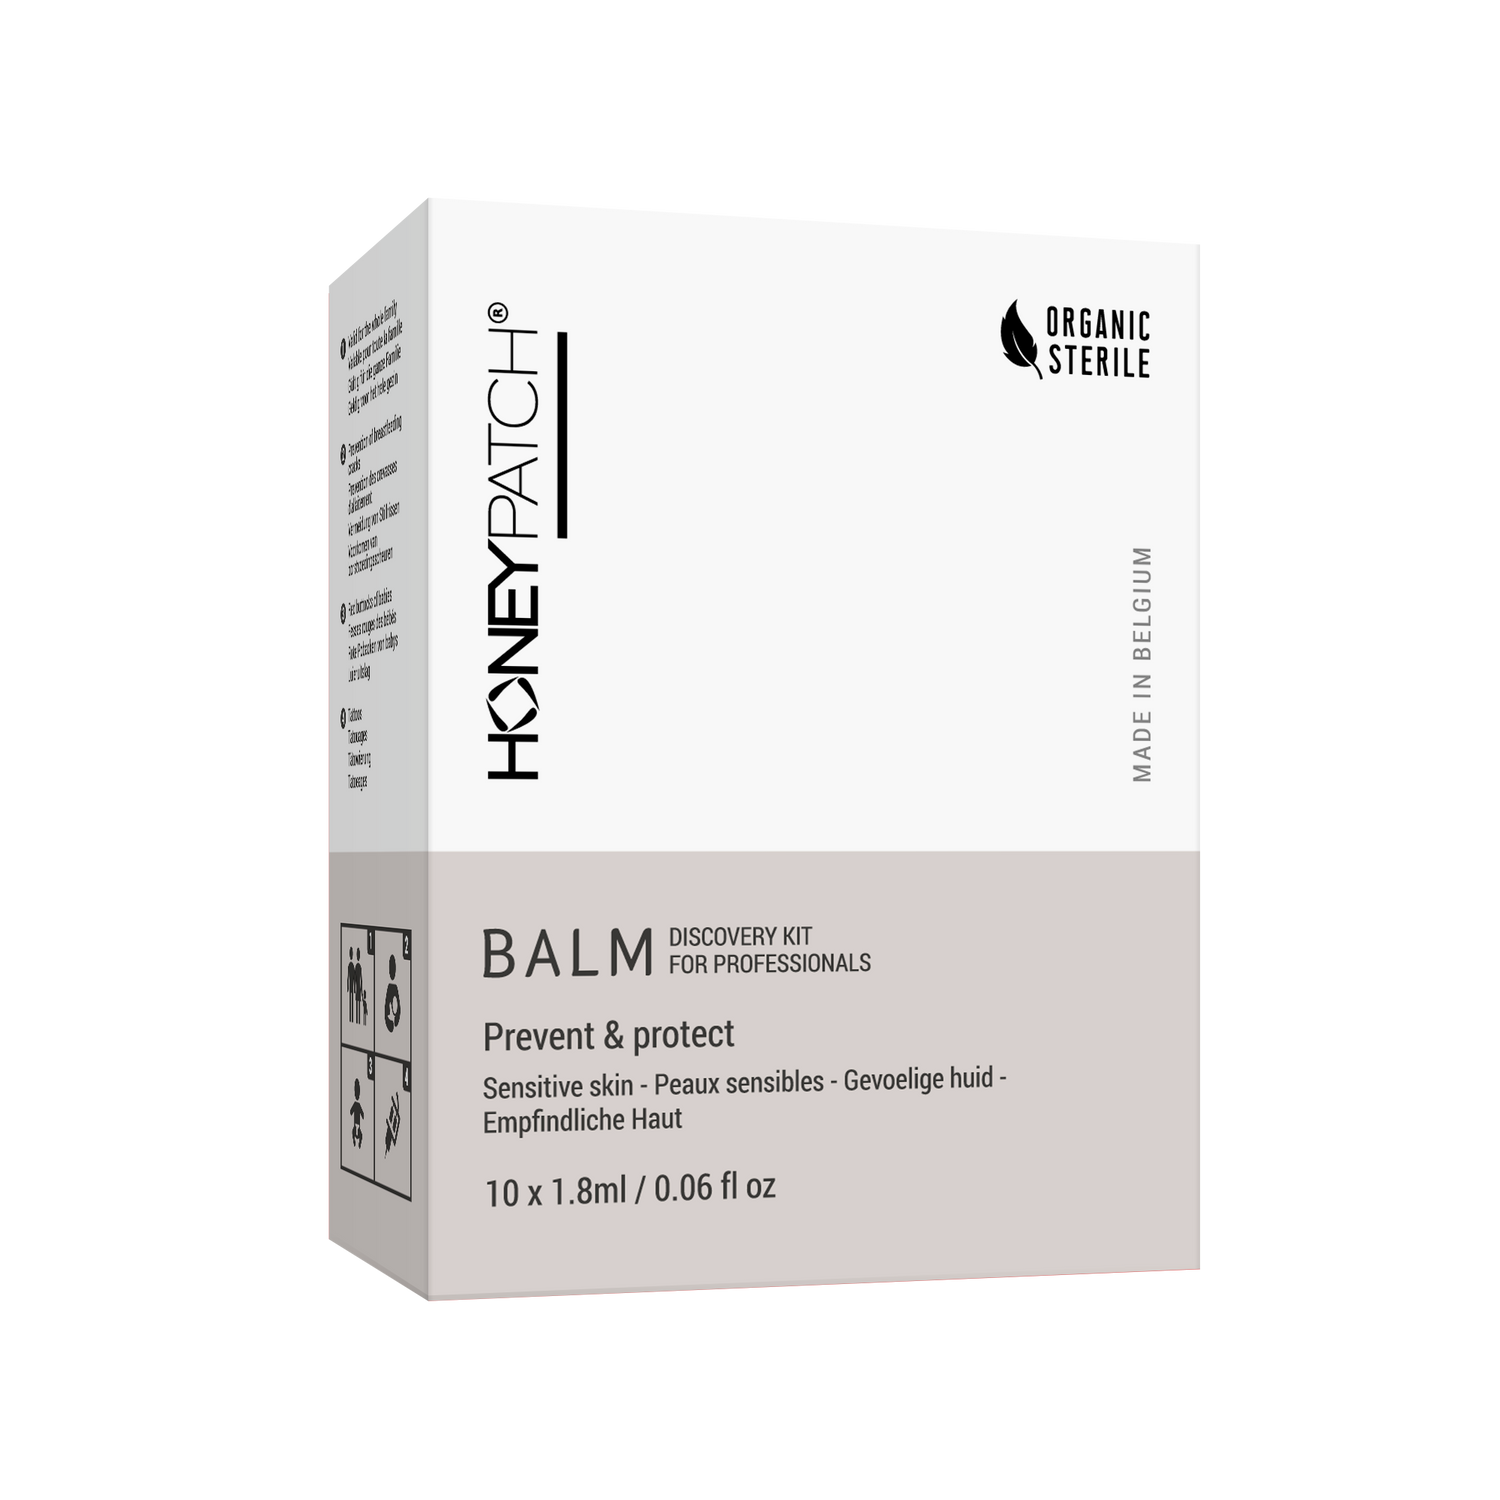 DISCOVERY KIT - 10 single doses of BALM CICACERA